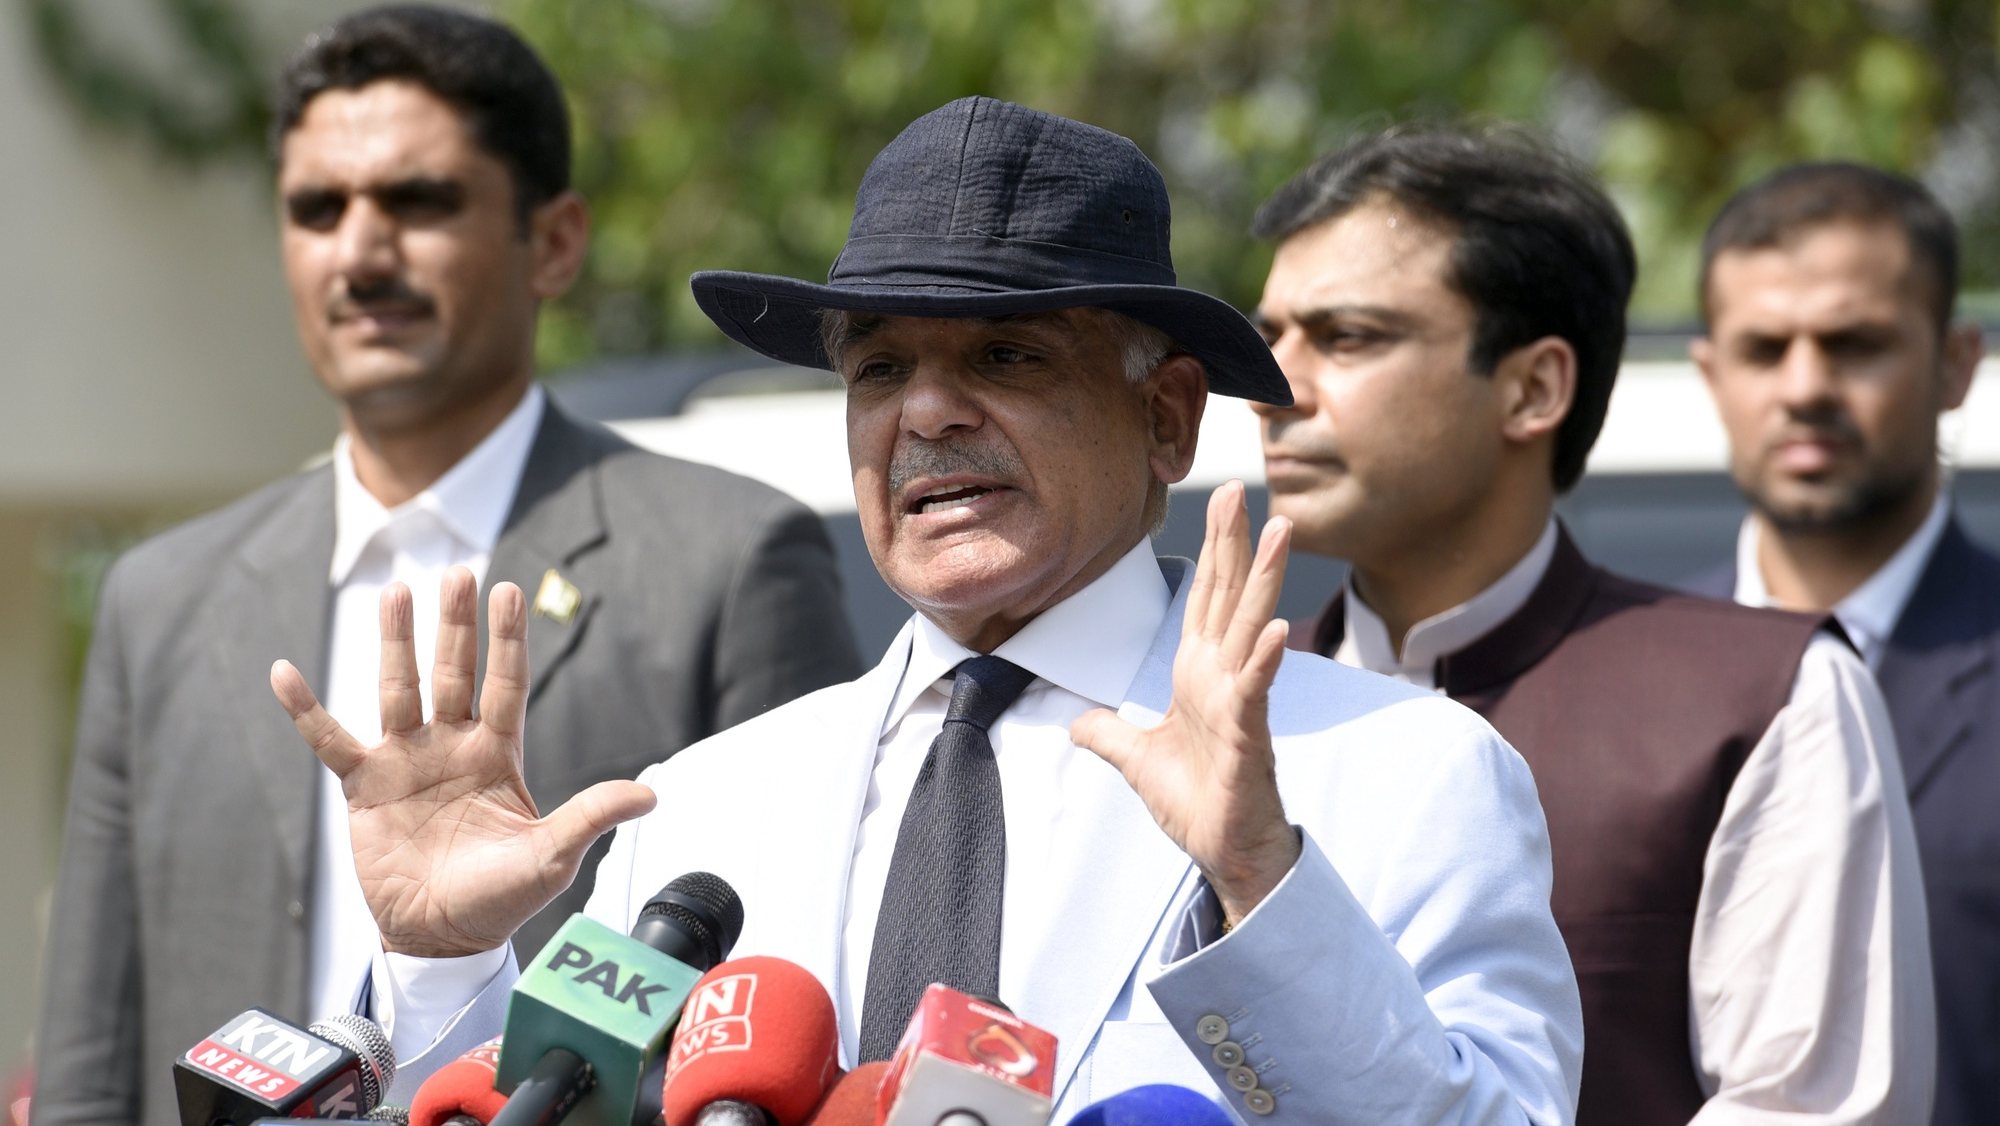 epa06033418 Punjab Chief Minister Shehbaz Sharif (C) talks with journalists after appearing before an investigation team formed by the Supreme Court of Pakistan to investigate the Sharif family&#039;s offshore properties that appeared in Panama papers, in Islamabad, Pakistan, 17 June 2017. The Pakistani Supreme Court on 20 April 2017 ordered the creation of a new commission to investigate the source of funds from companies associated with the family of Prime Minister Nawaz Sharif, after he was implicated in the massive Panama Papers scandal in 2016. Five judges in charge of the case, also concluded there was insufficient evidence to disqualify Sharif from his position.  EPA/T. MUGHAL